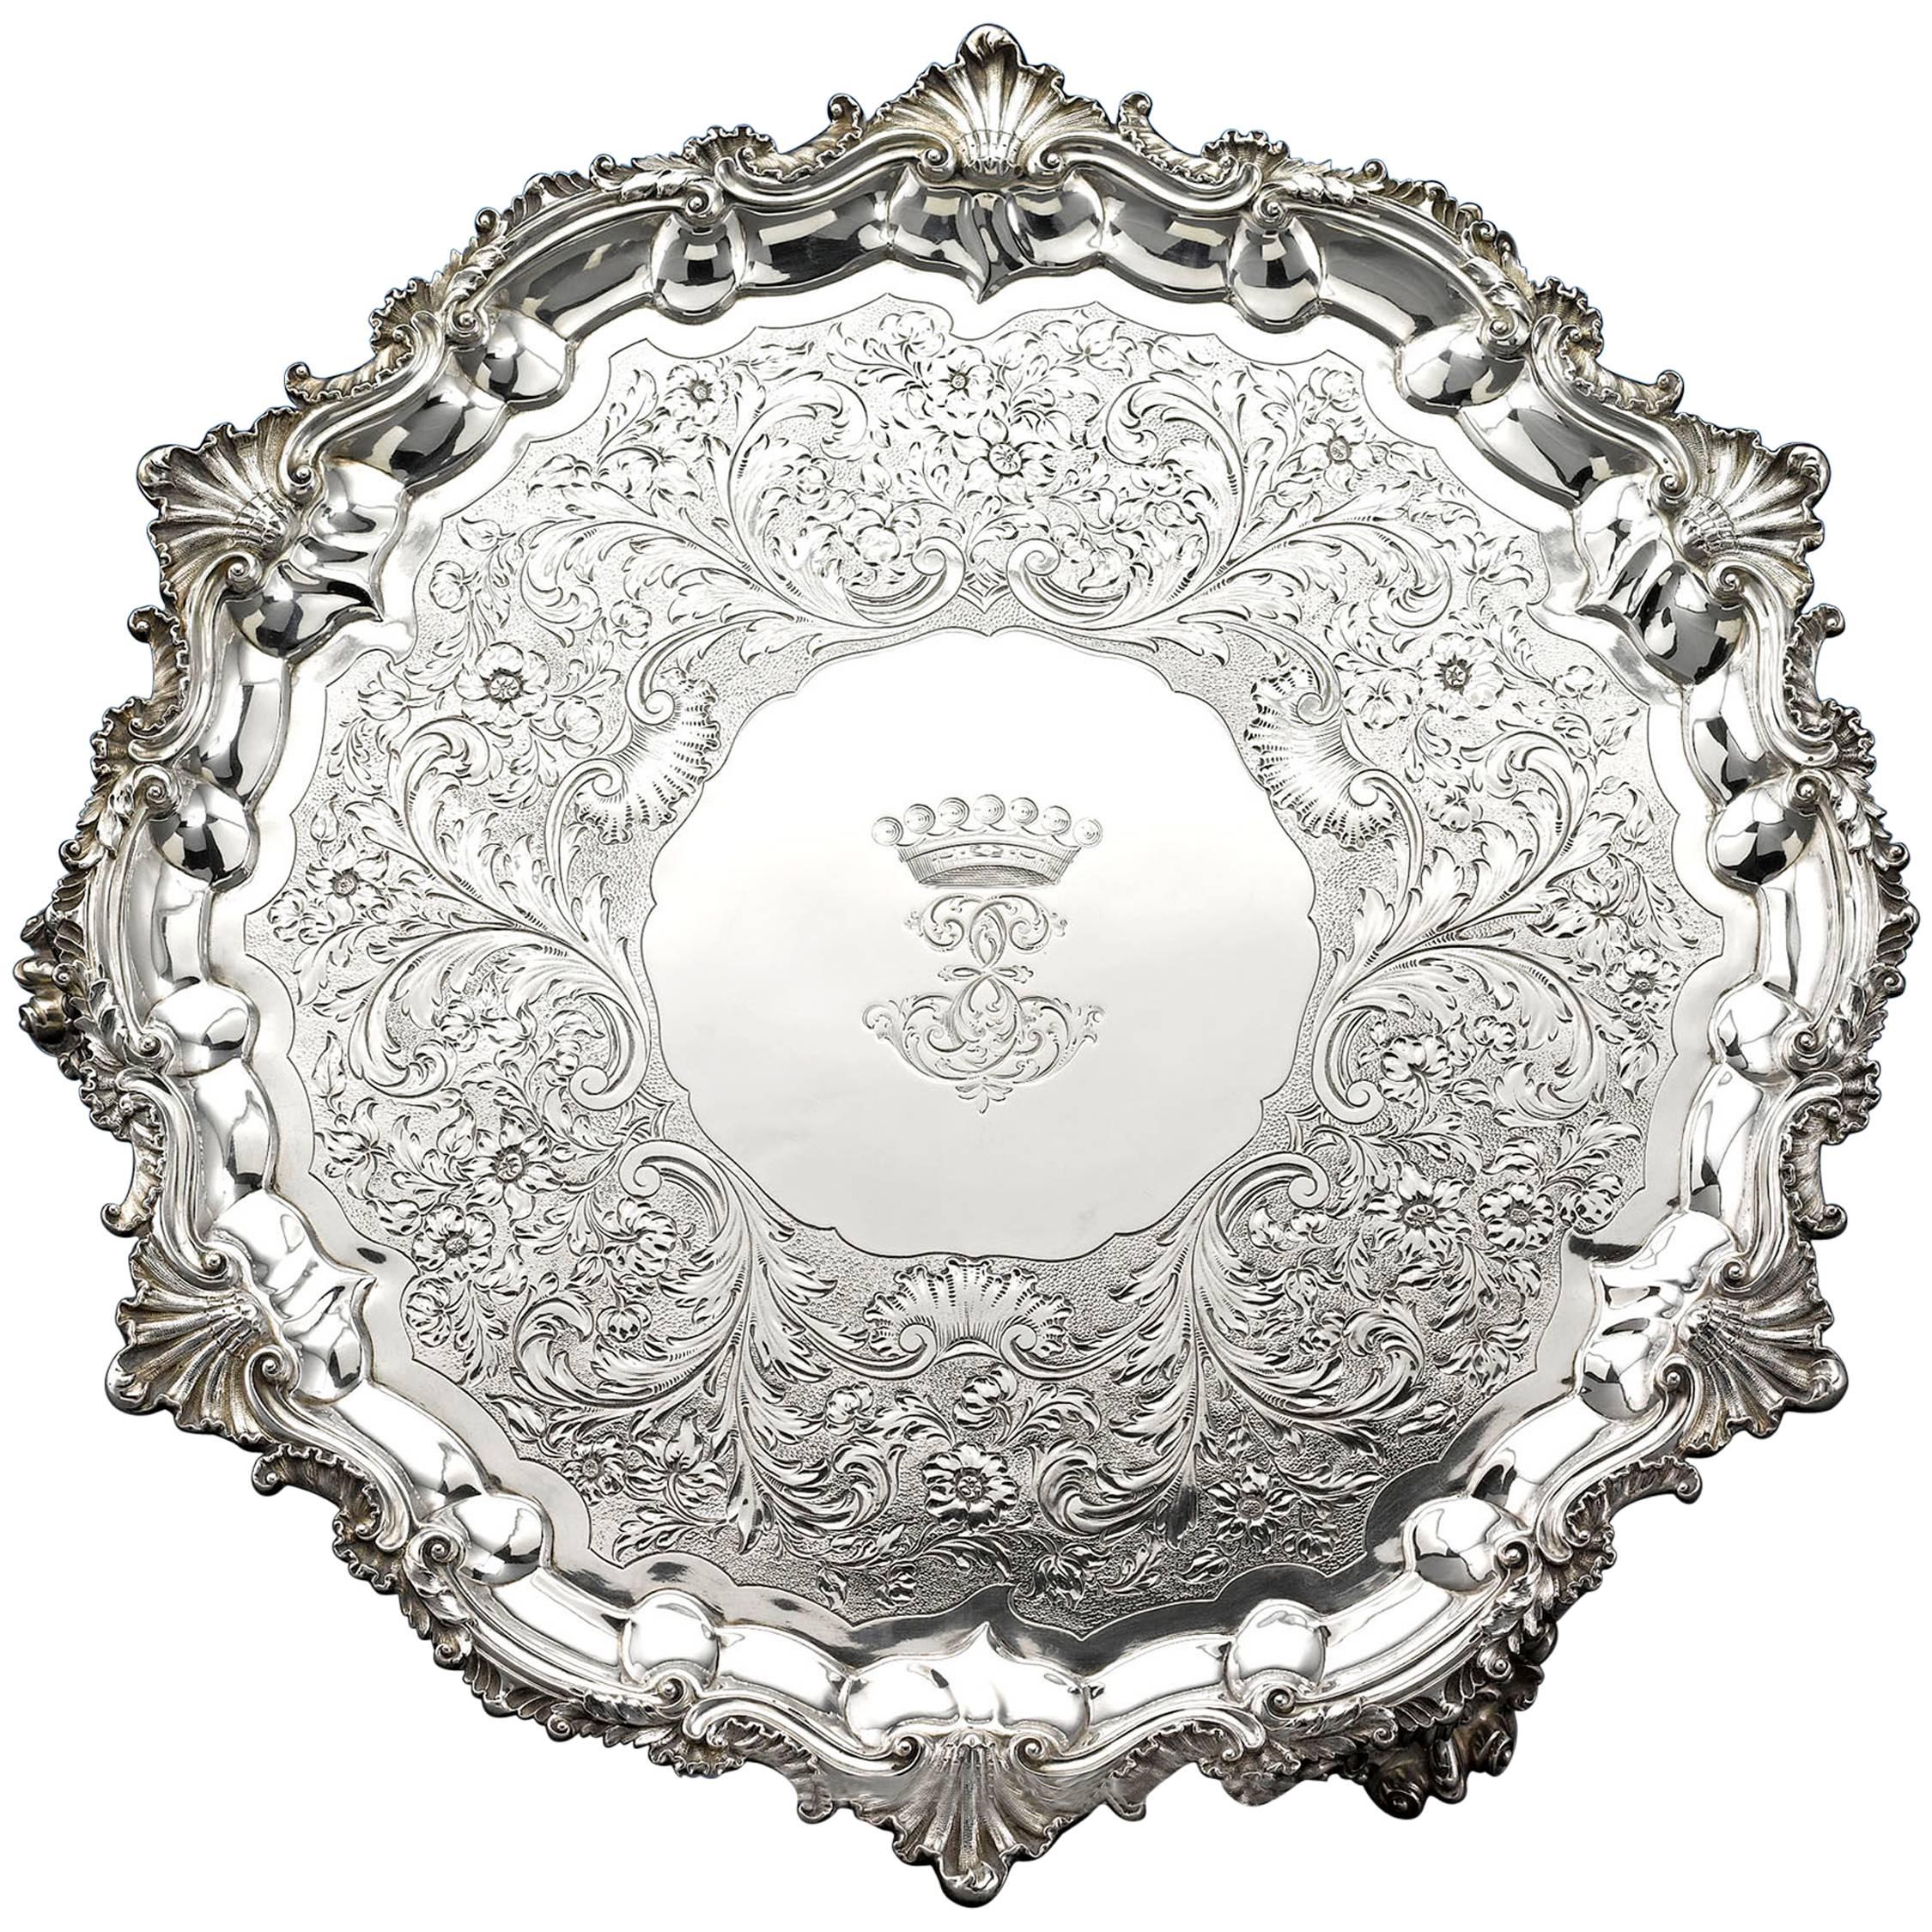 William IV Silver Tray by Paul Storr